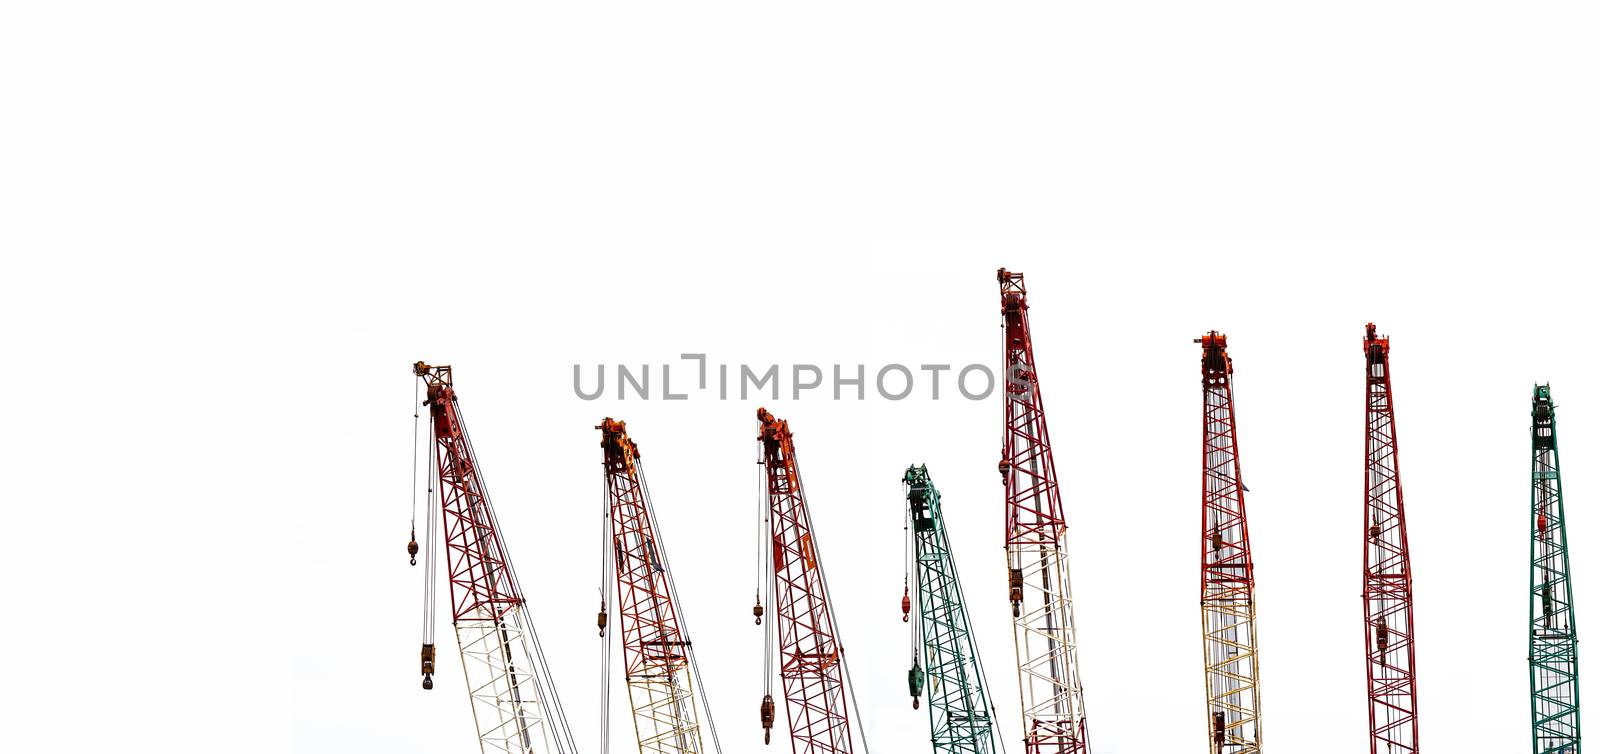 Set of big construction crane for heavy lifting isolated on white background. Construction industry. crane for container lift or at construction site. Crane rental business concept. Crane dealership.